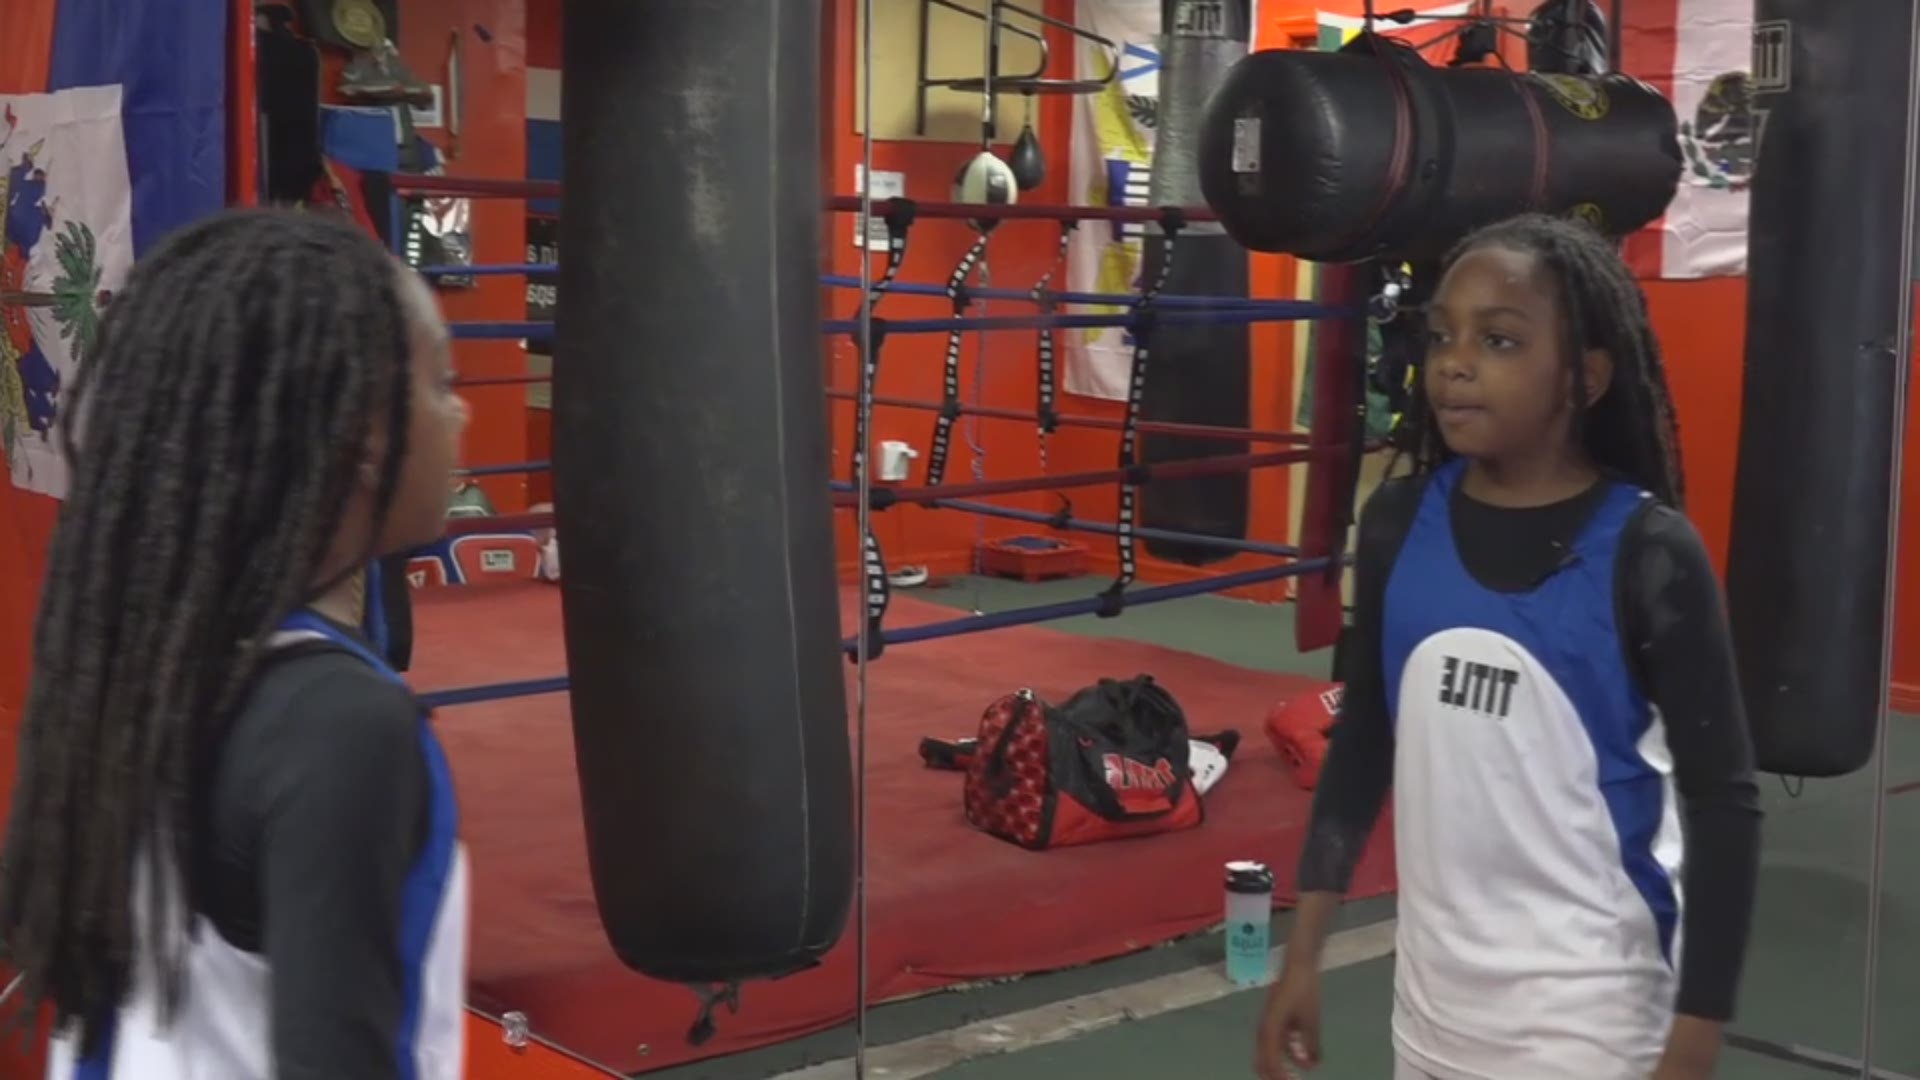 10 year old boxing talent speaks words of affirmation with dad's help